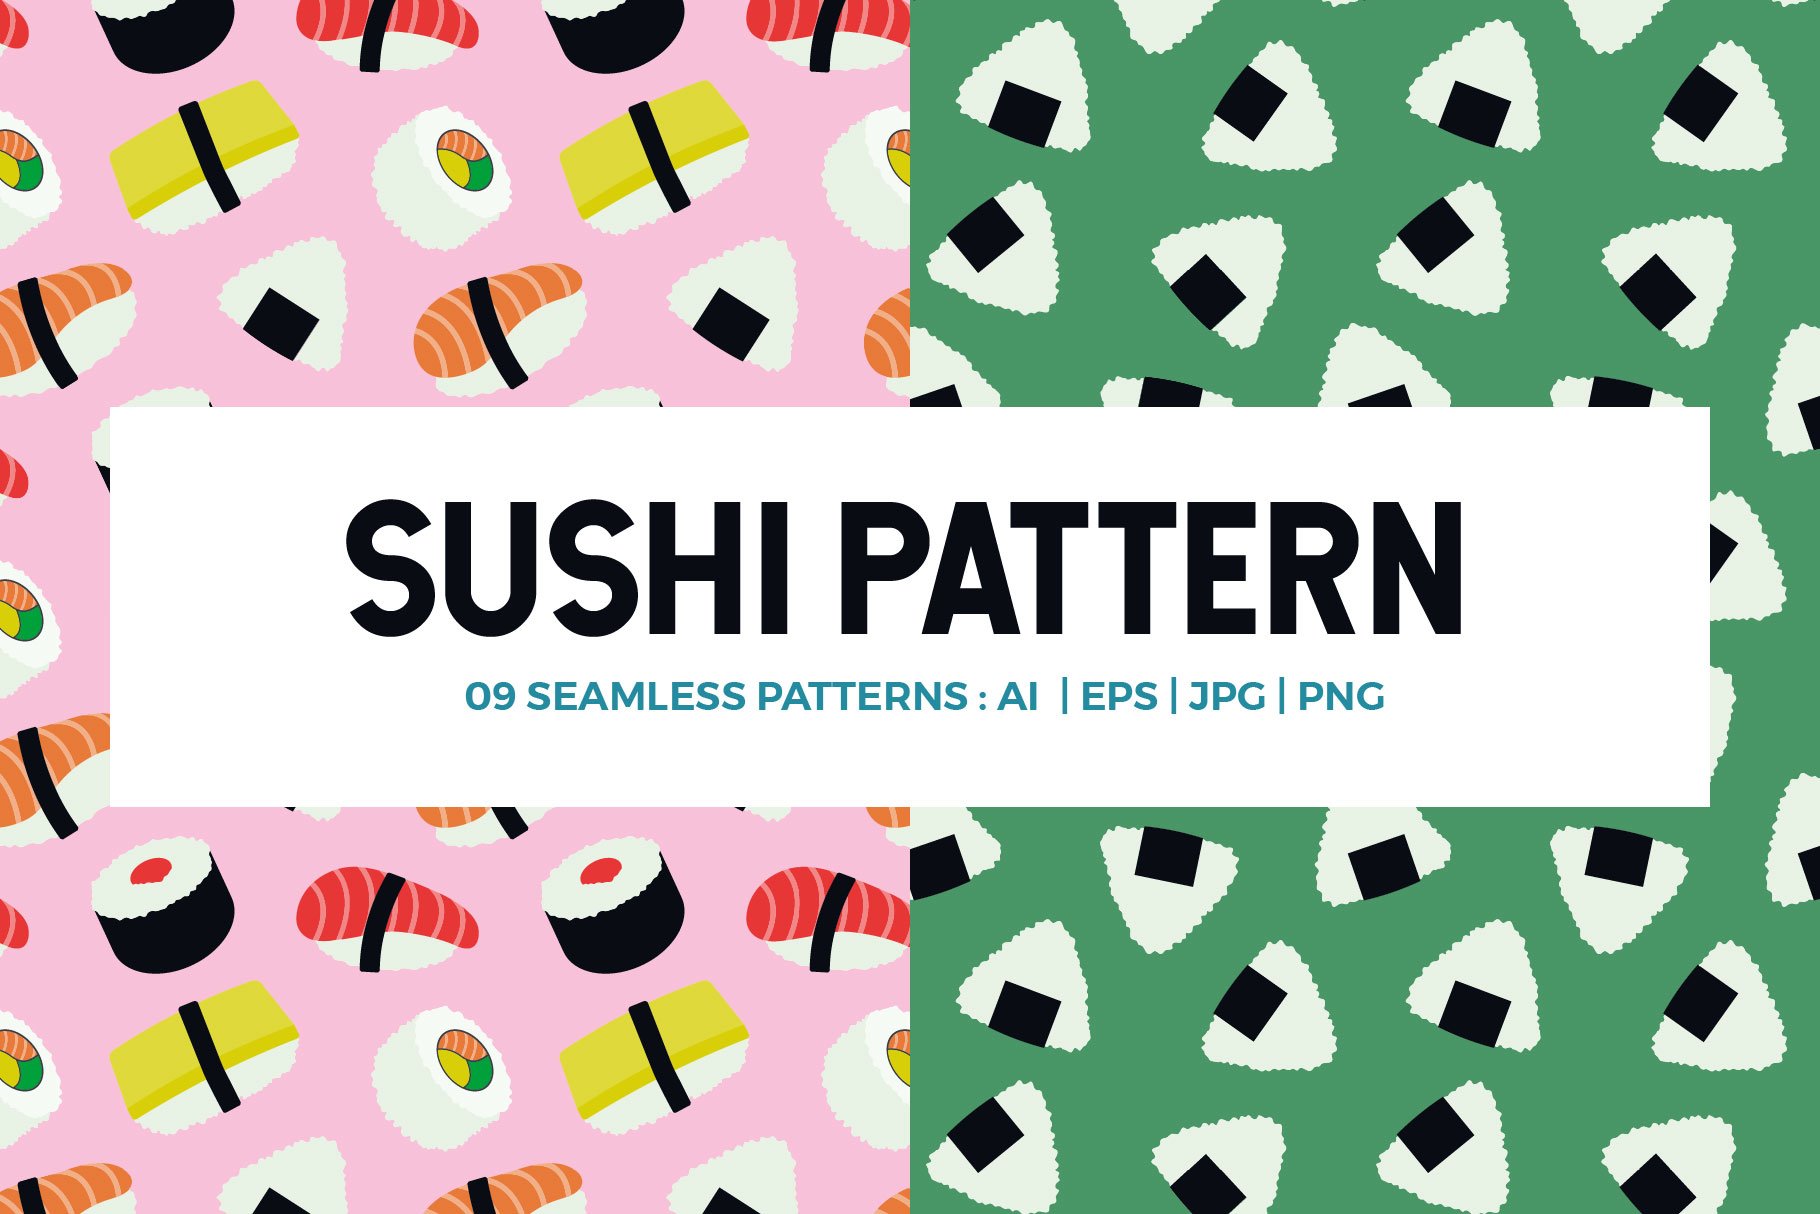 Sushi Seamless Pattern cover image.